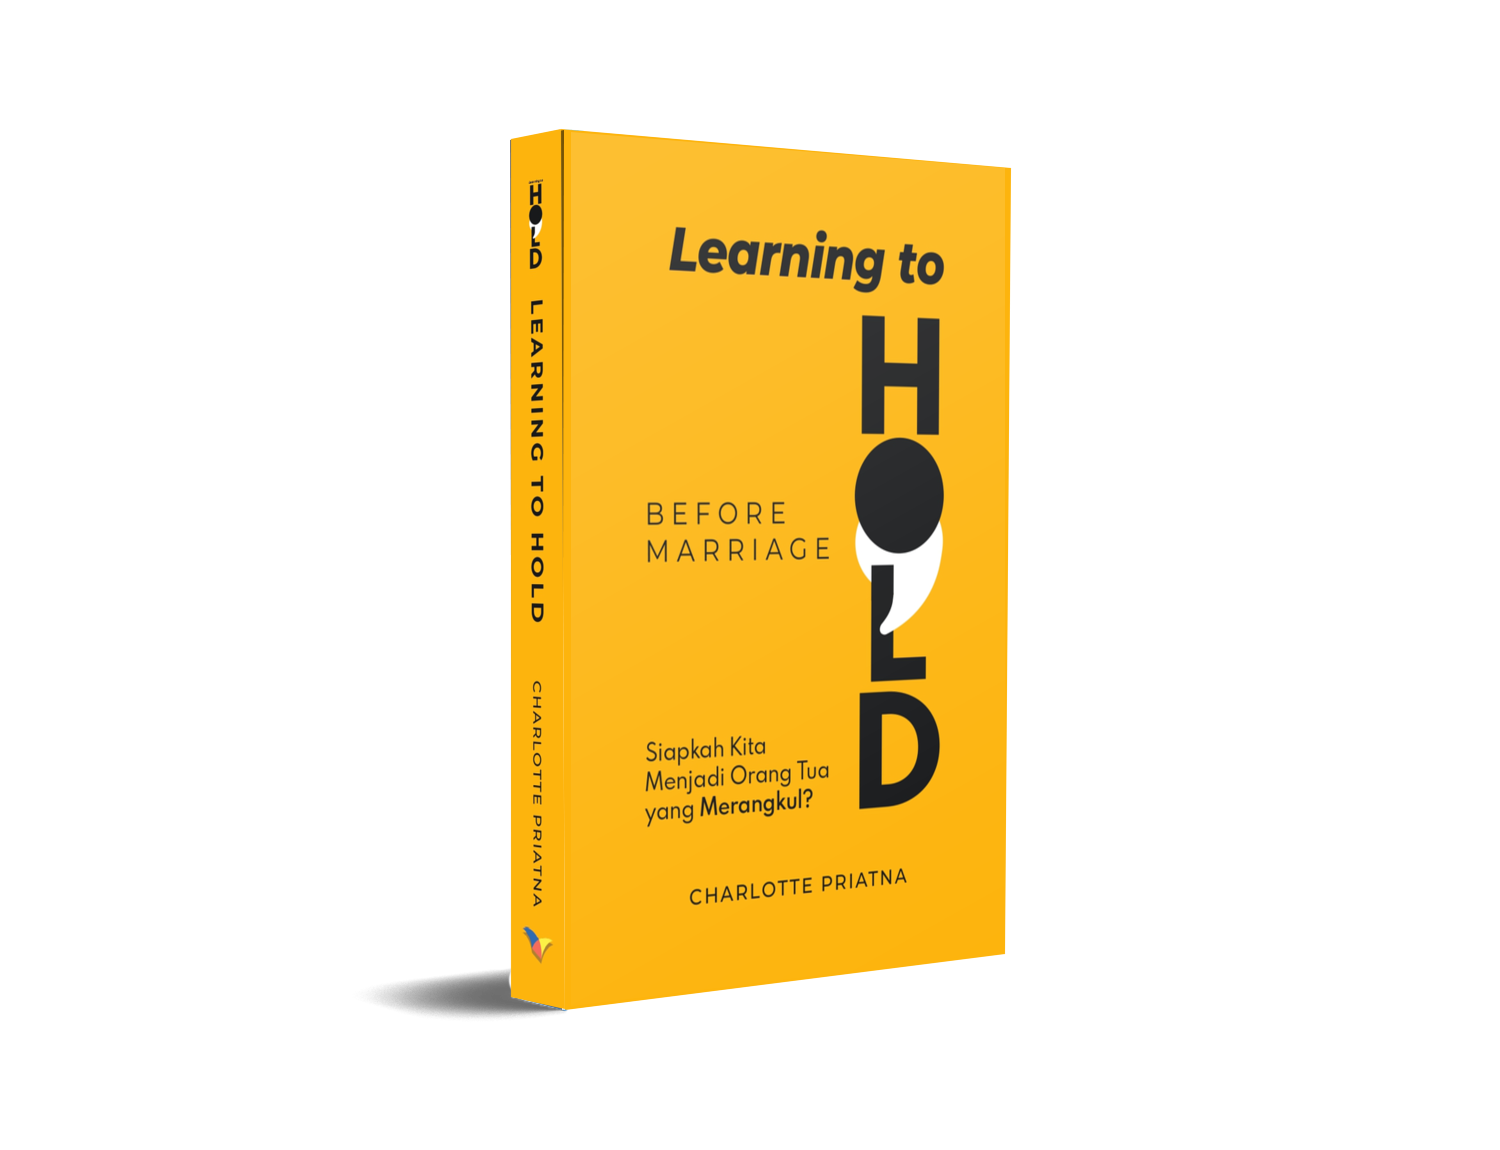 Learning to HOLD: BEFORE MARRIAGE